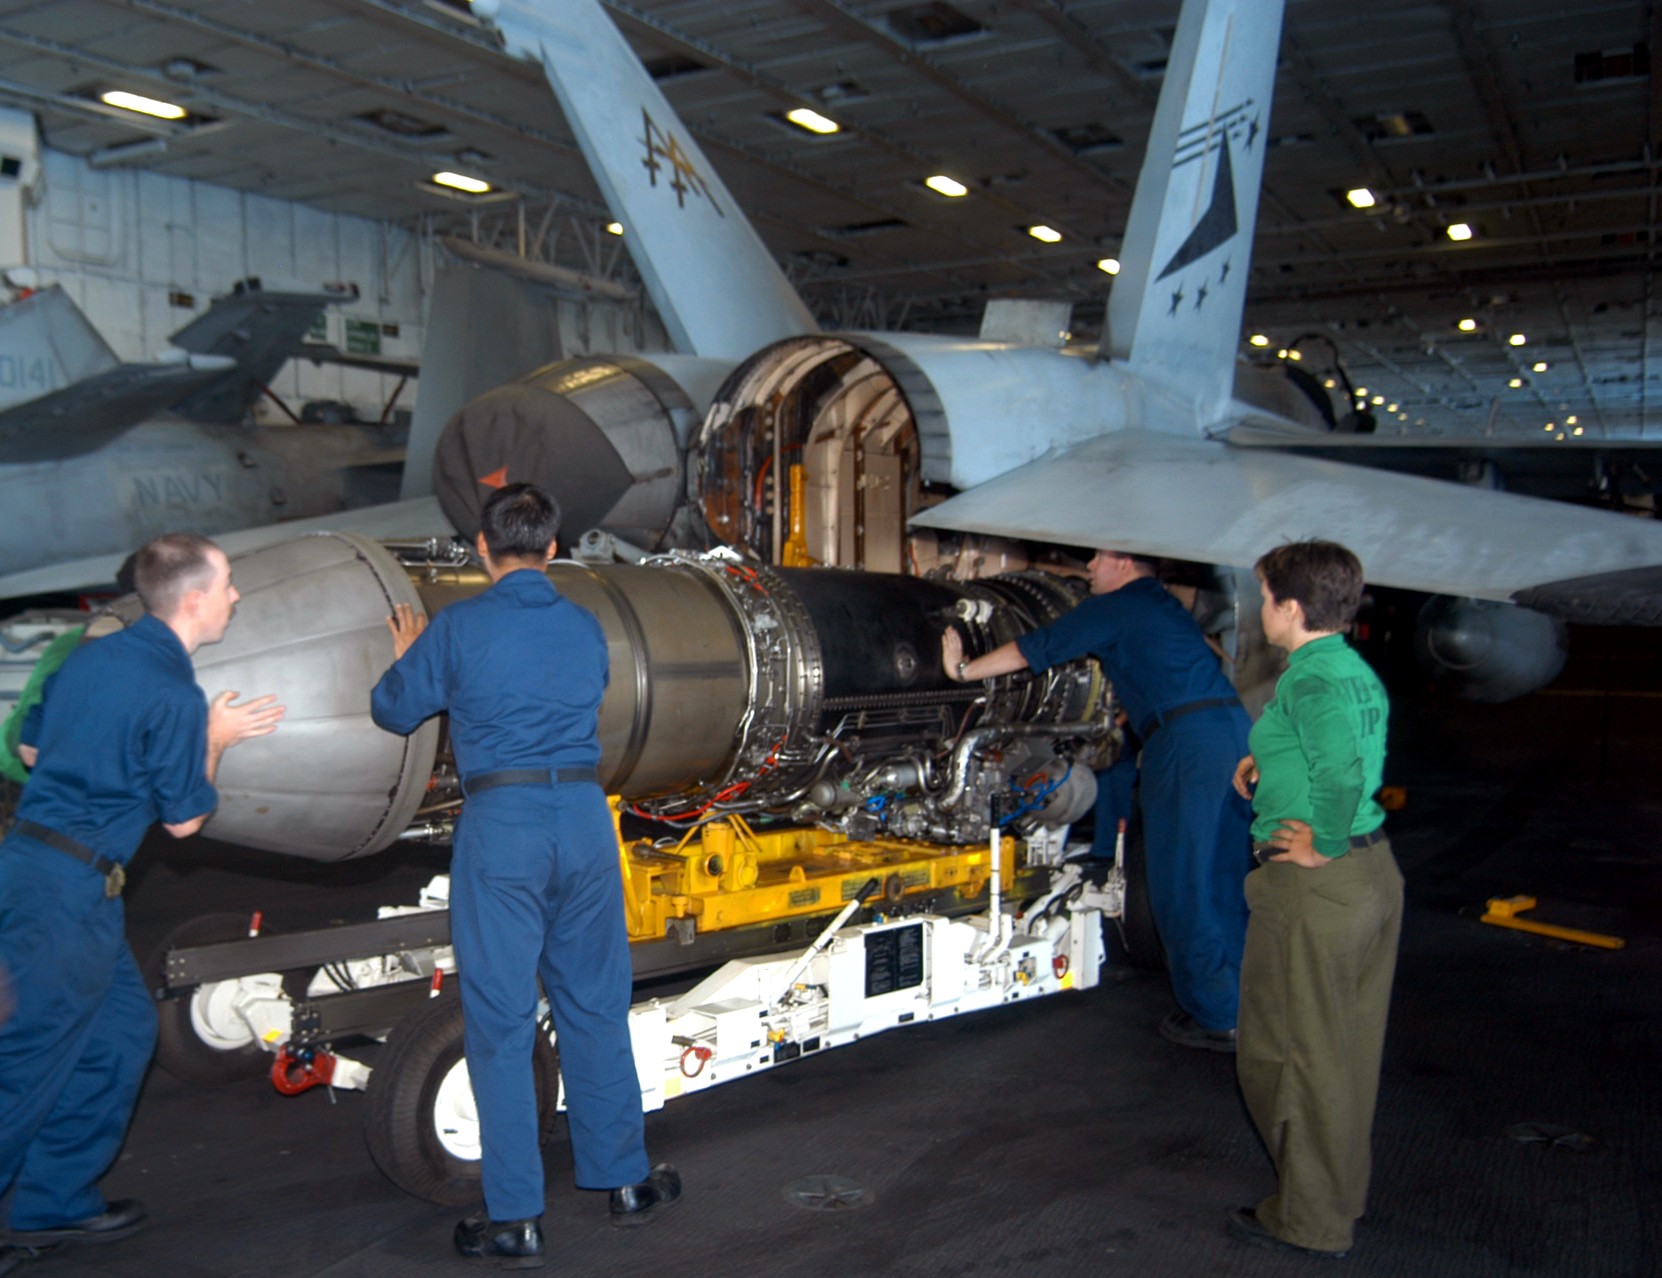 vfa-81 sunliners f/a-18c hornet general electric f404-ge-400 jet engine